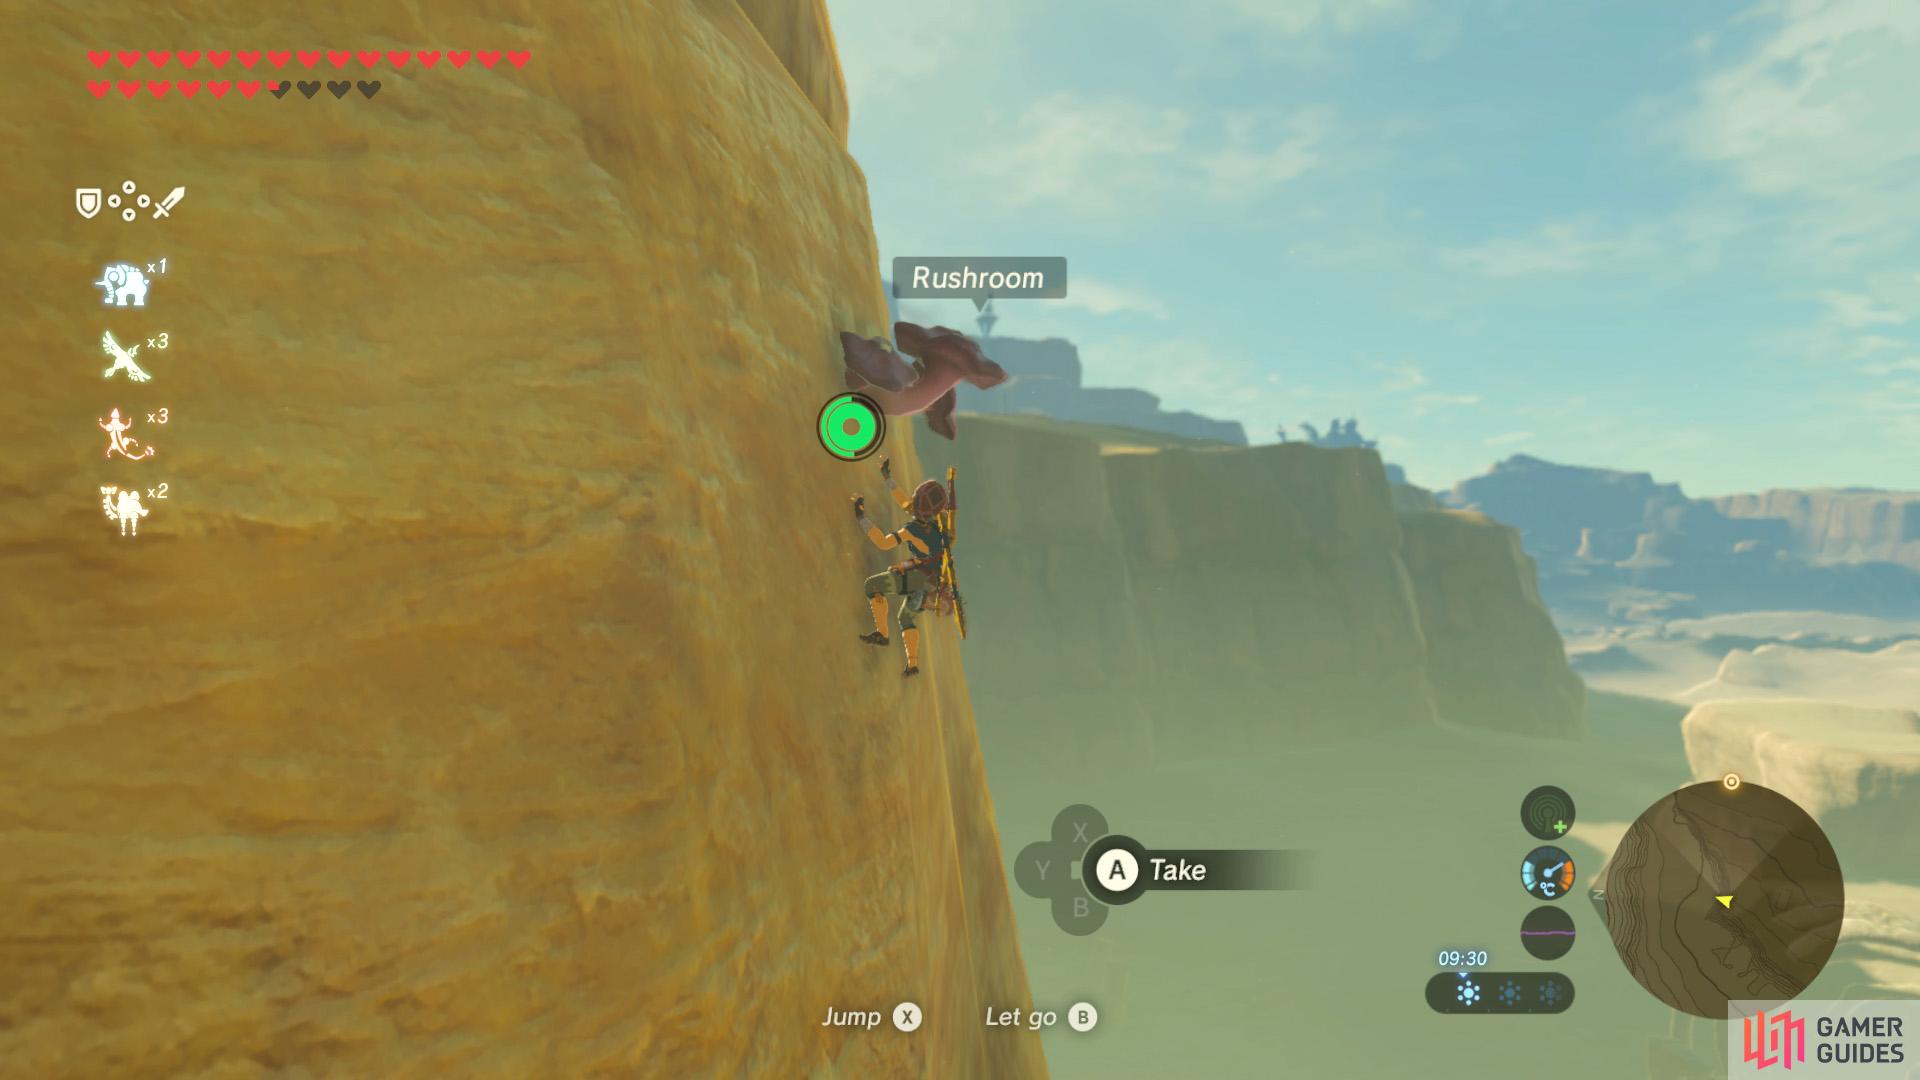 If you have lots of stamina, you can climb up towards the Gerudo Highlands.